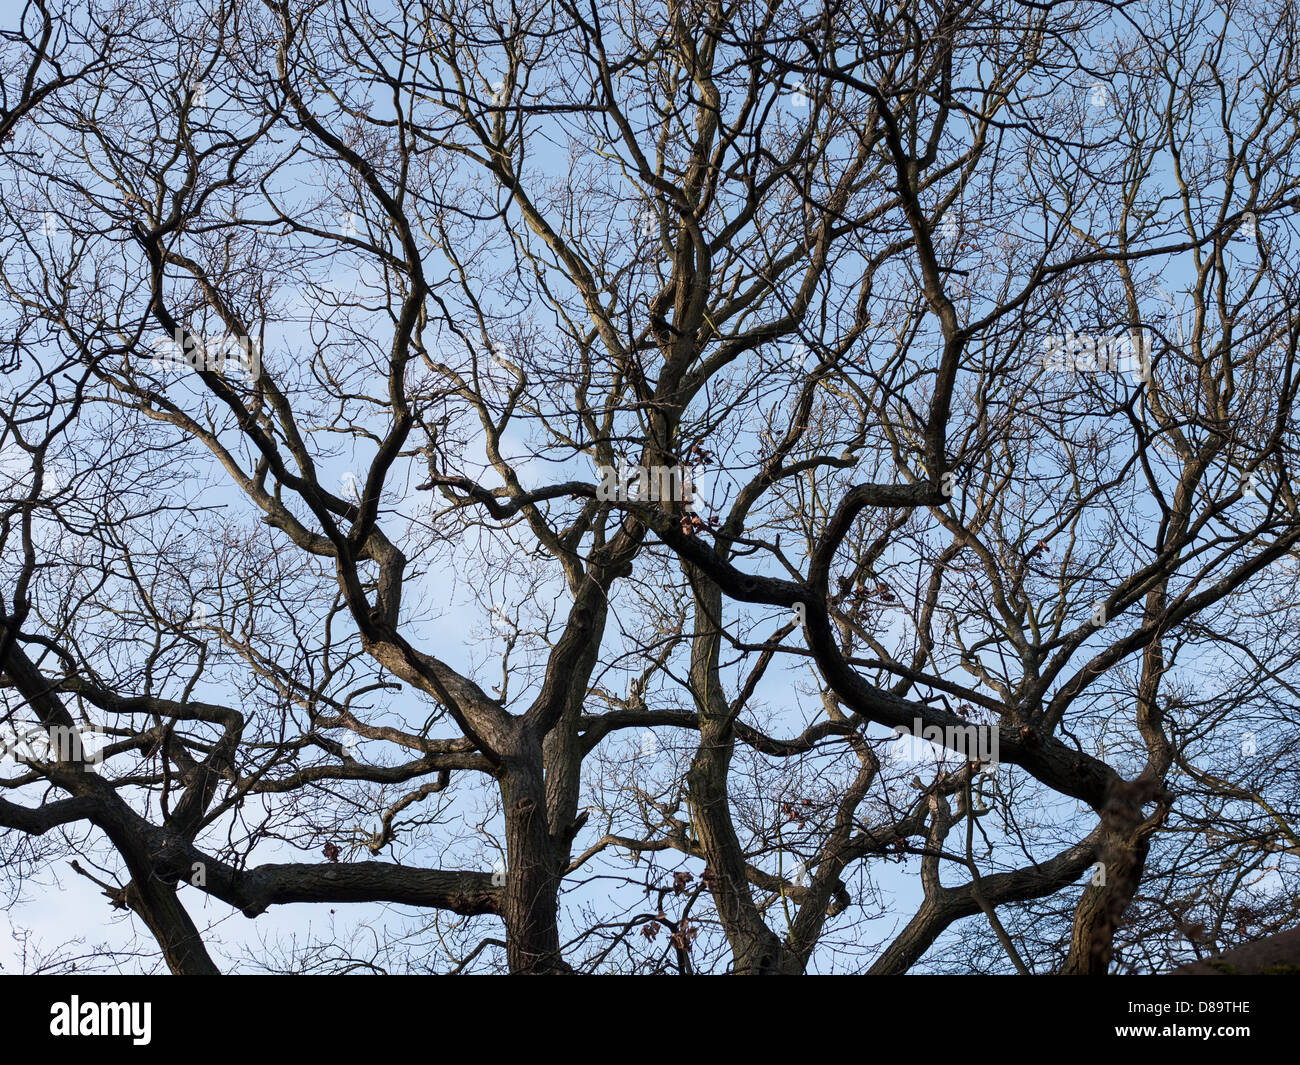 Looking up to silhouettes of tree branches with a background of blue sky Stock Photo